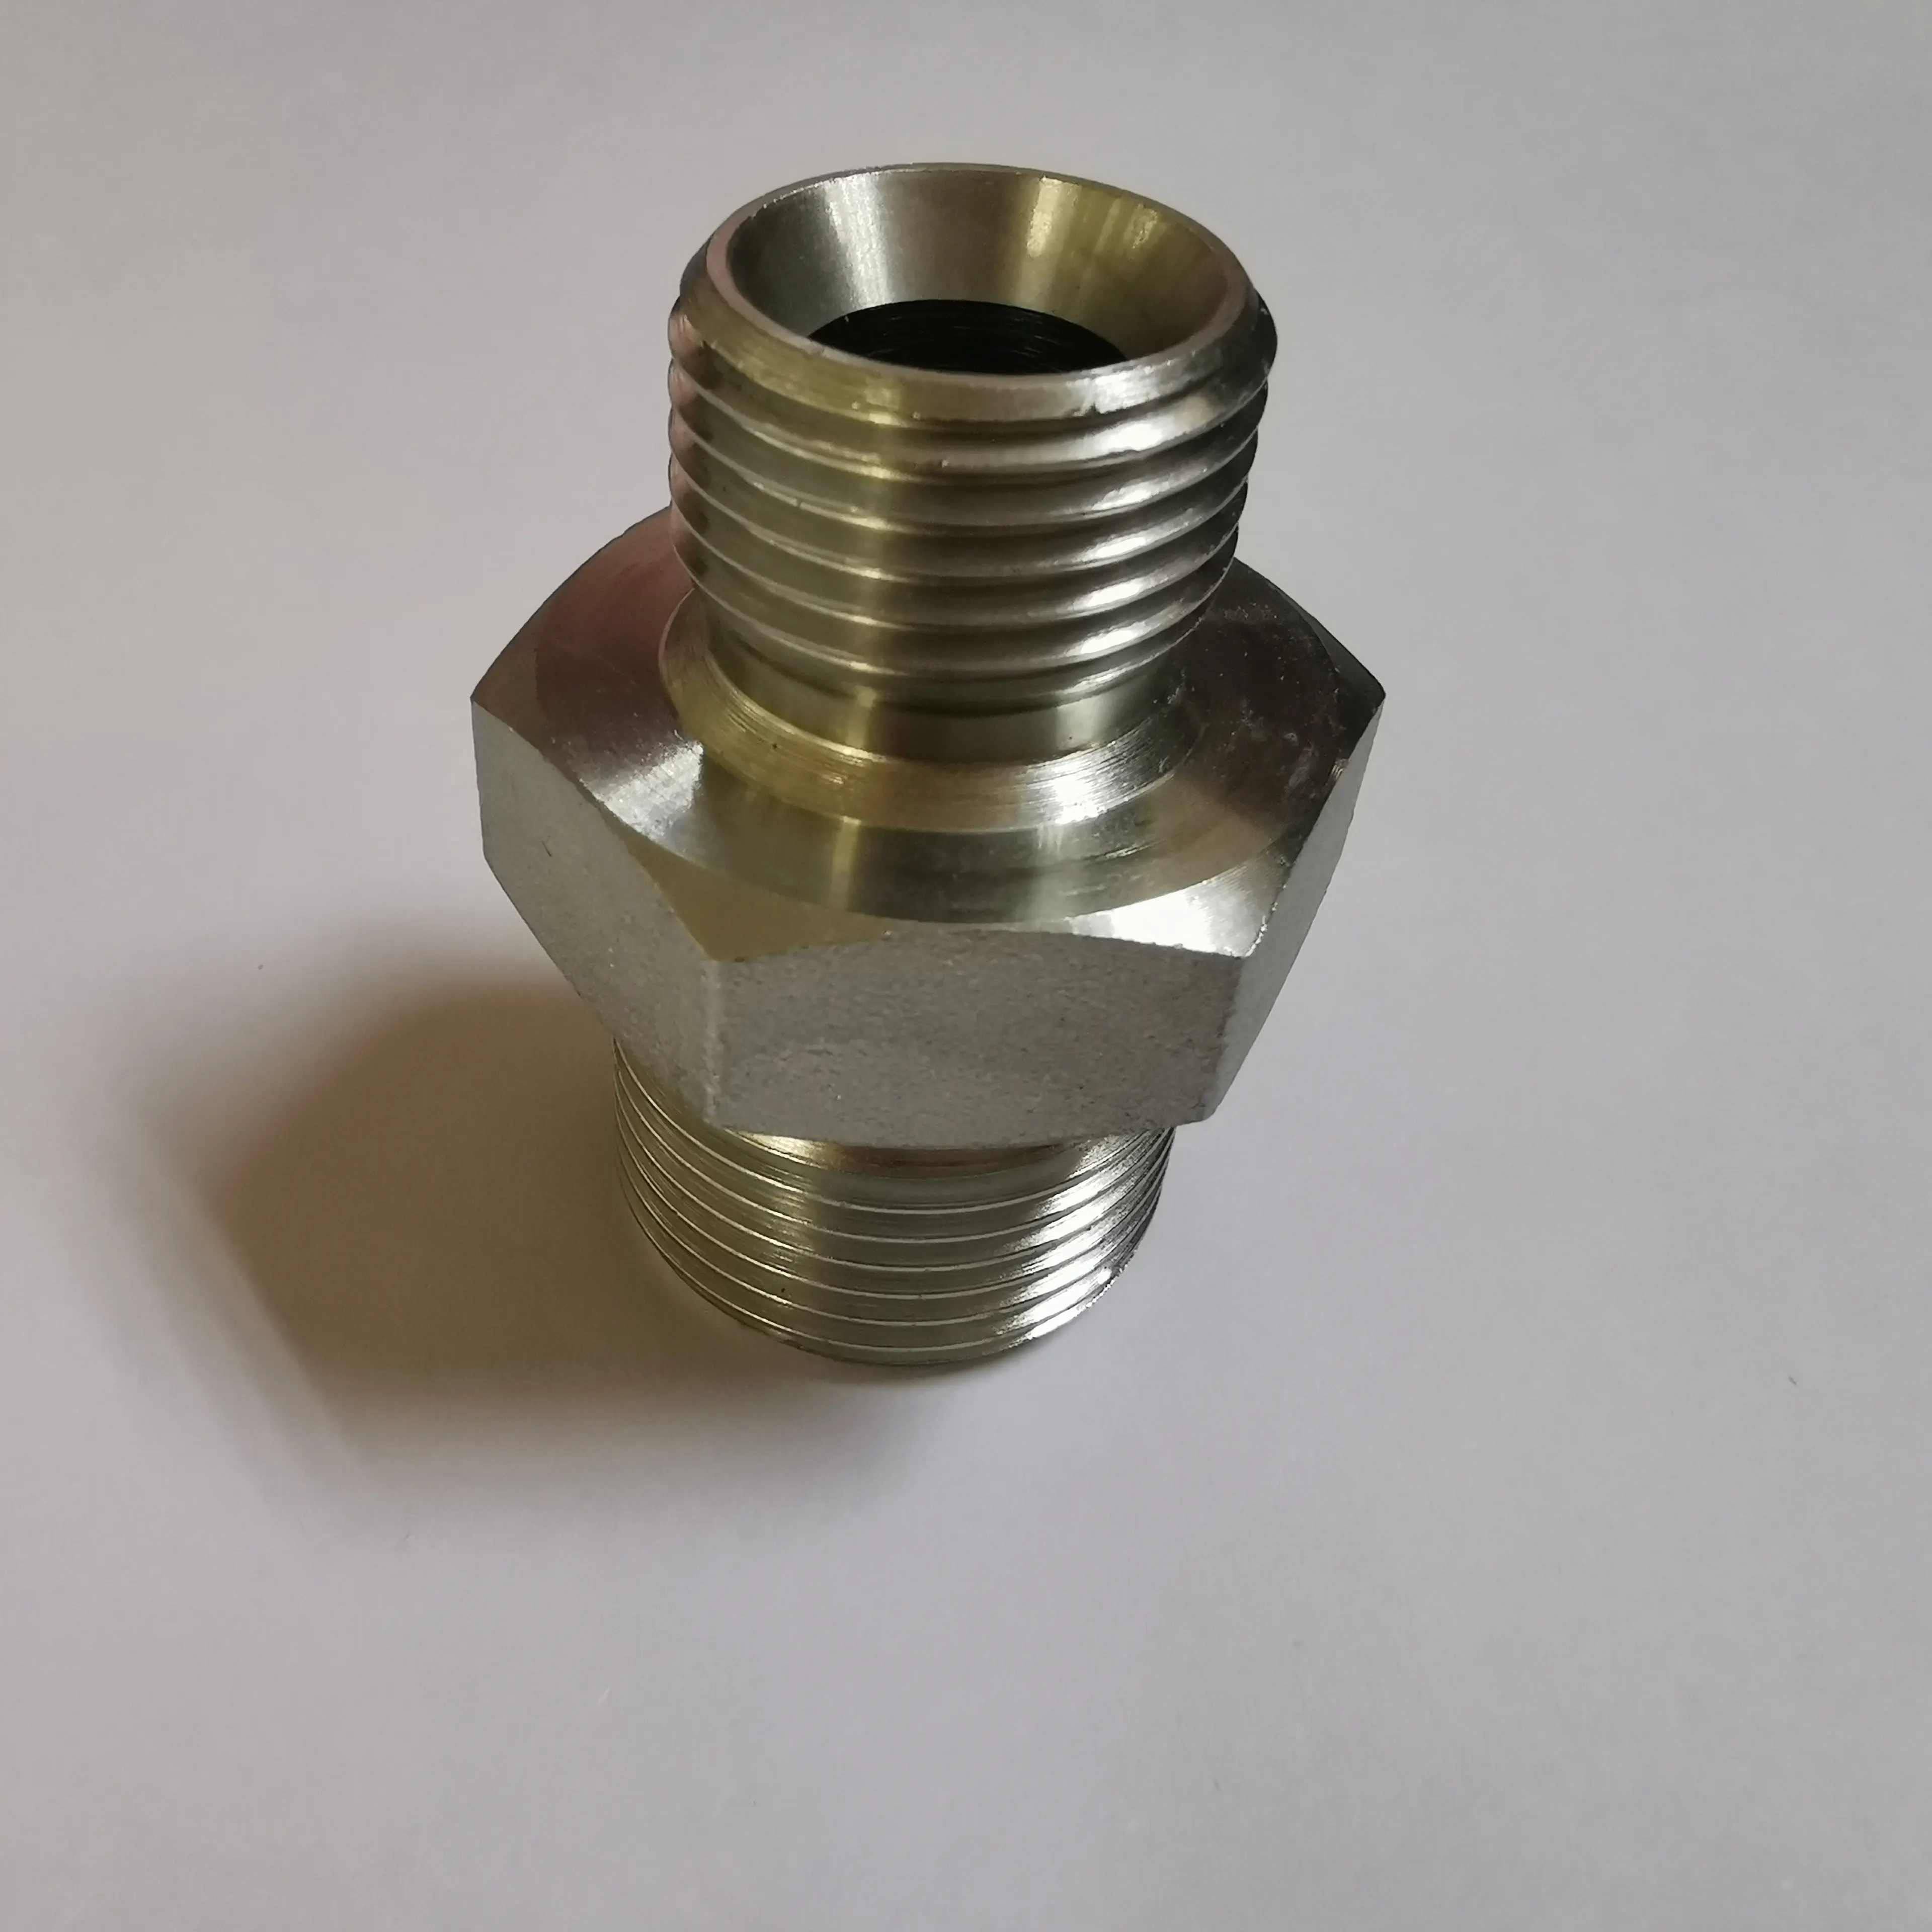 BSPP MALE DOUBLE USE FOR 60 DEGREE SEAT OR BONDED SEAL HYDRAULIC FITTING